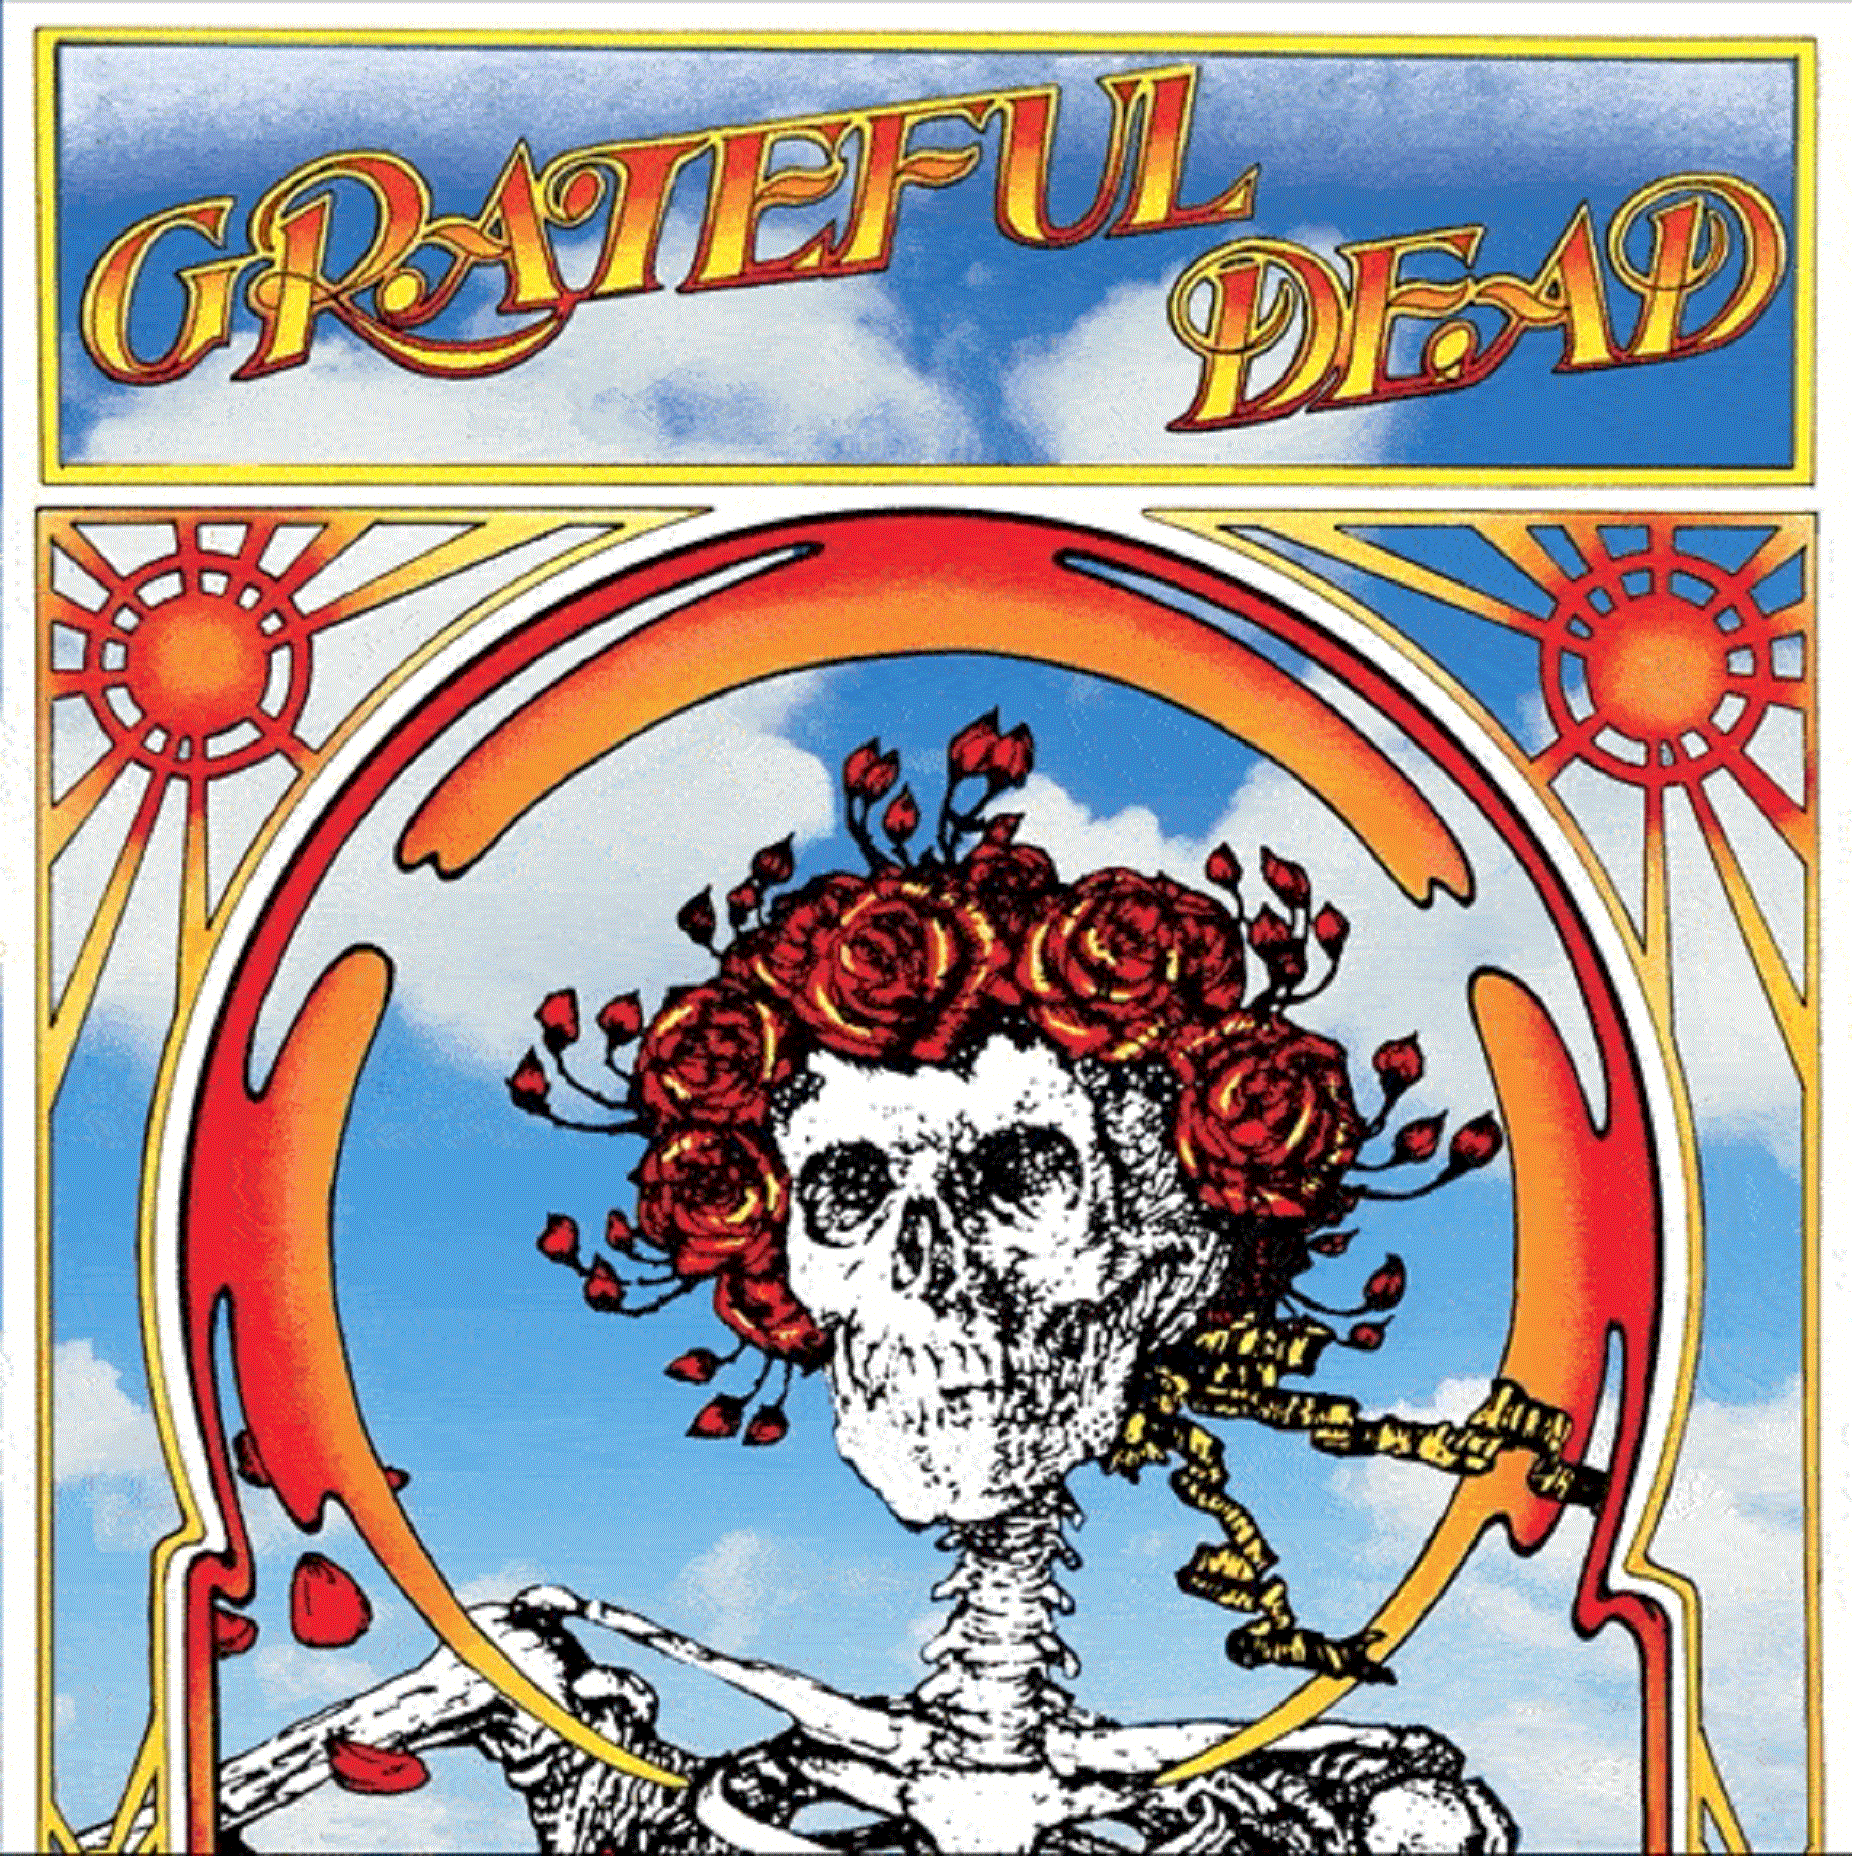 Now Available Skull & Roses (50th Anniversary Expanded Edition